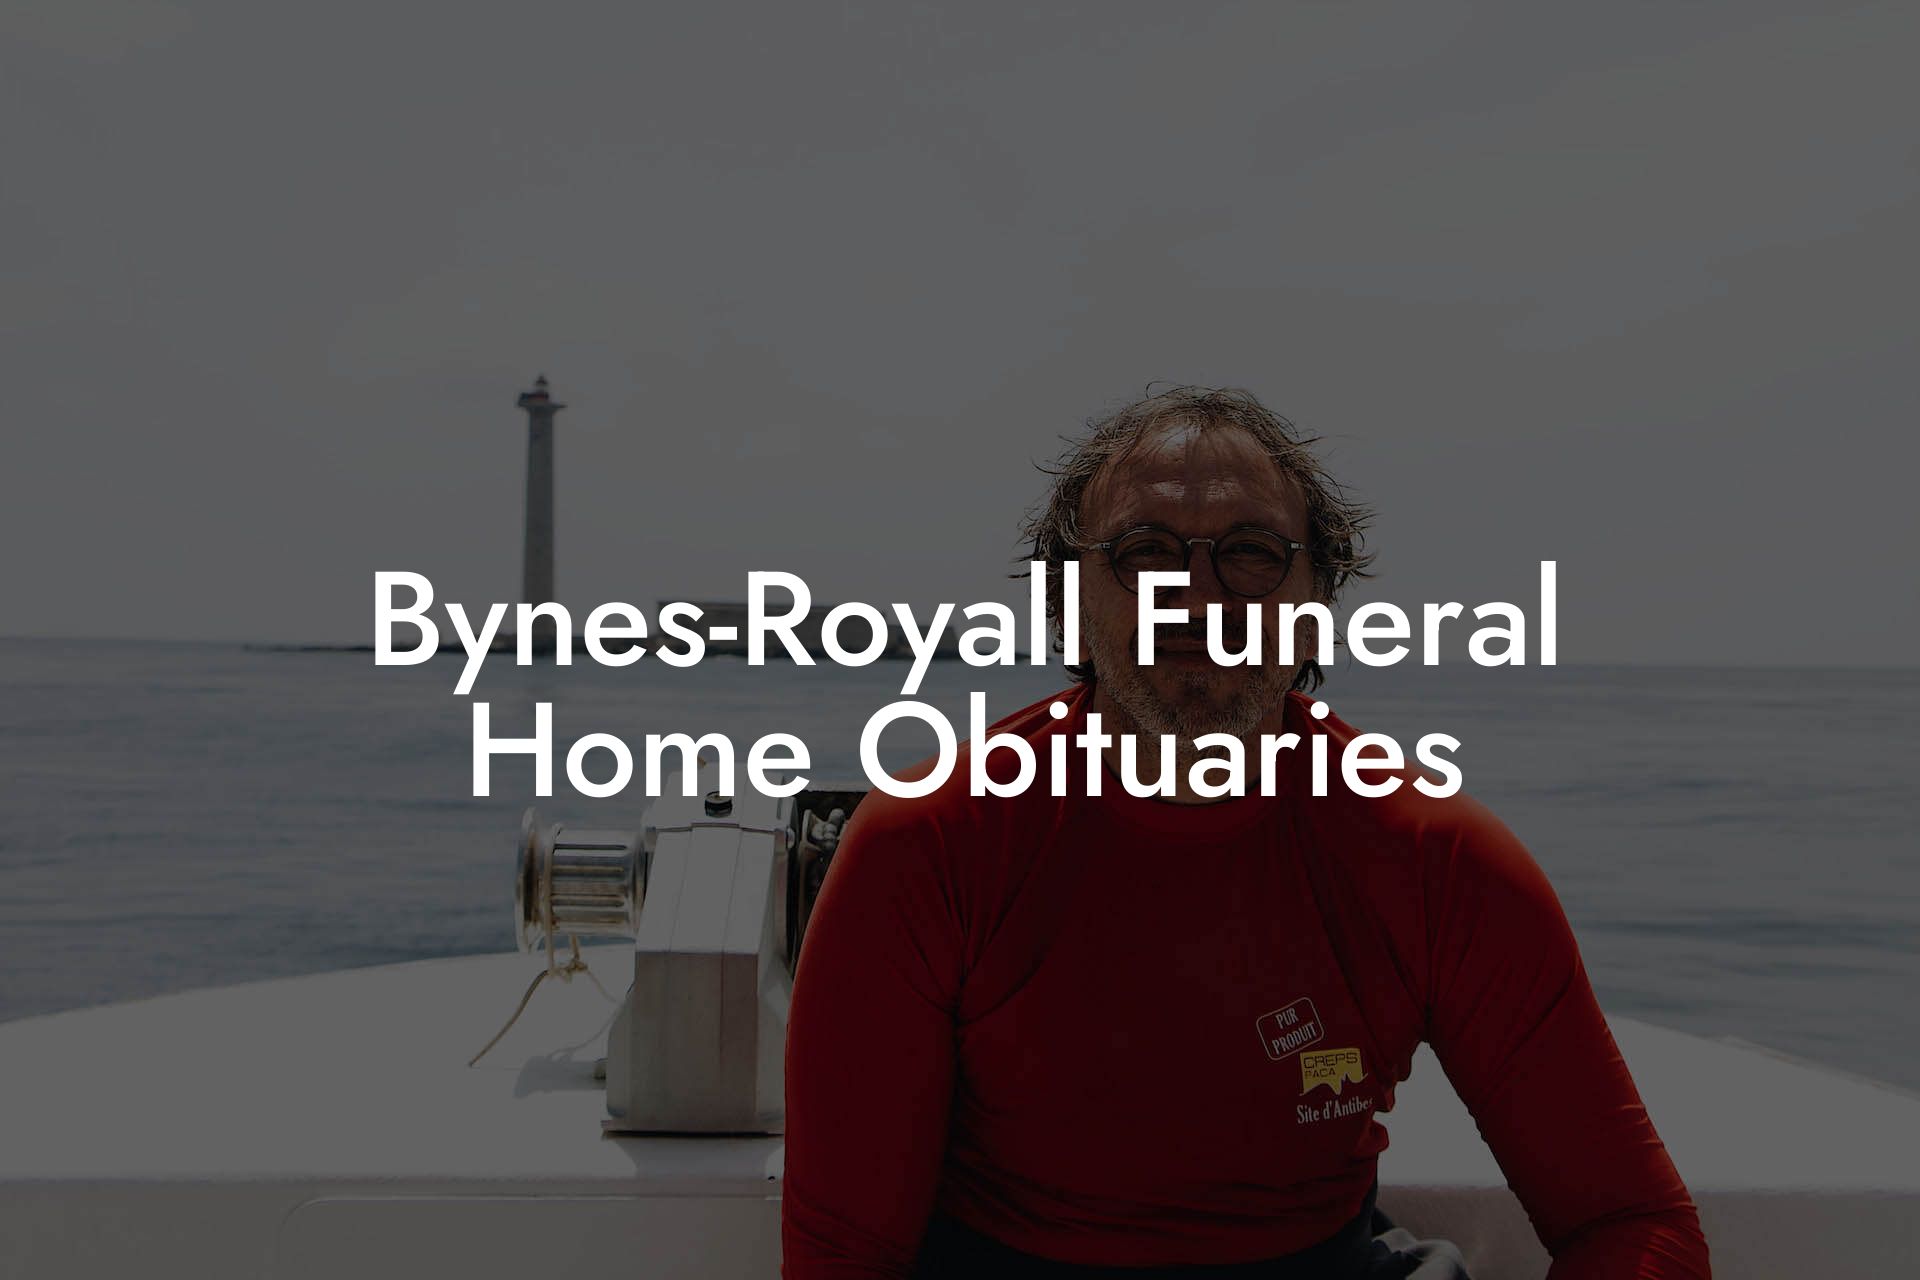 Bynes-Royall Funeral Home Obituaries